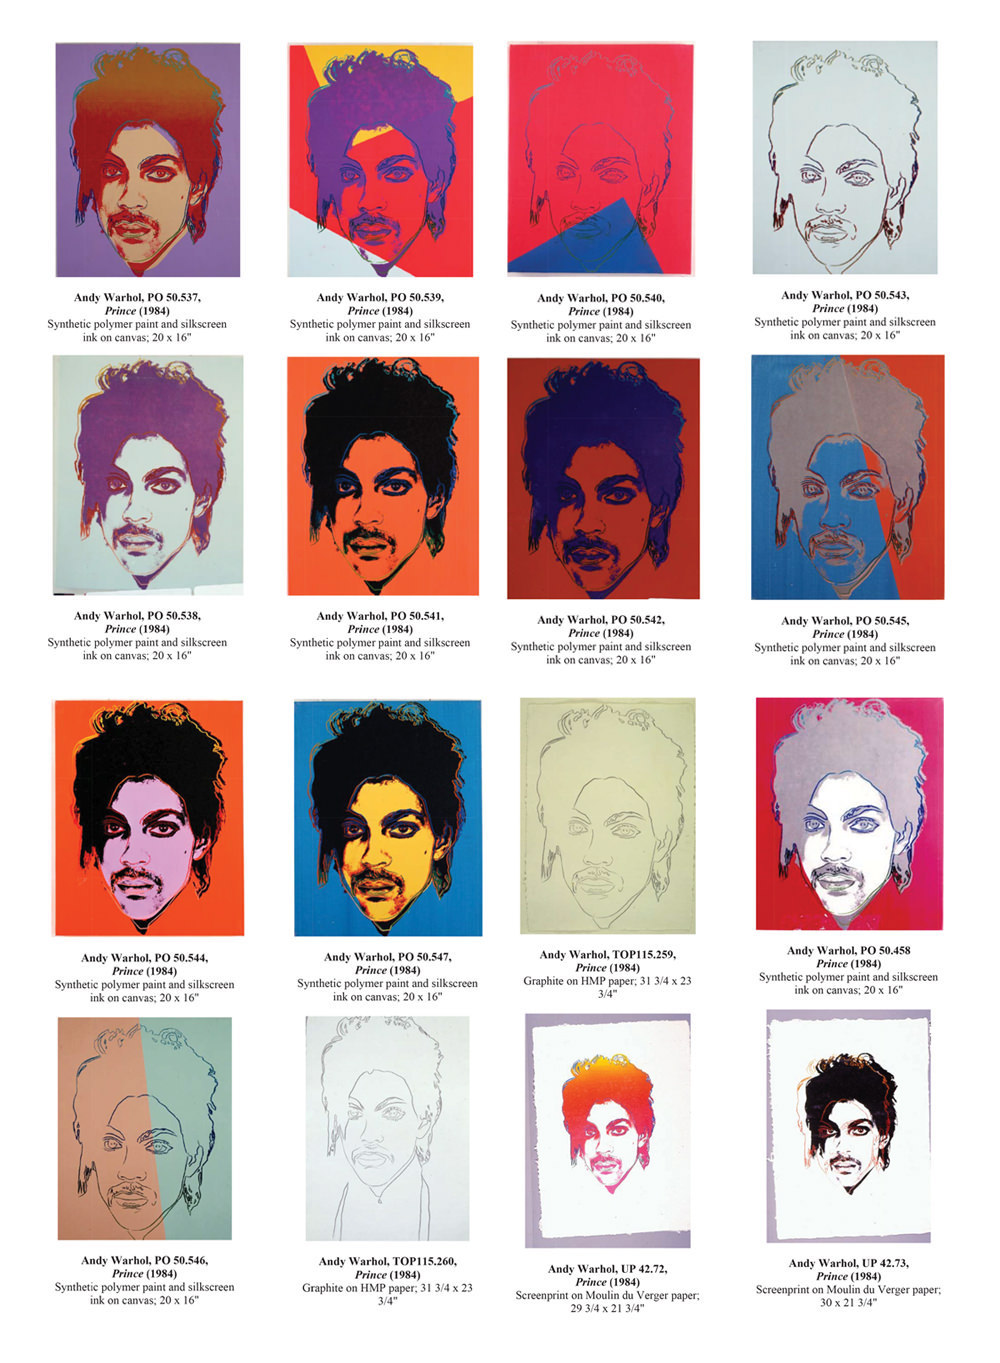 The 16 artworks created by Andy Warhol based on a 1981 Lynn Goldsmith photograph of Prince